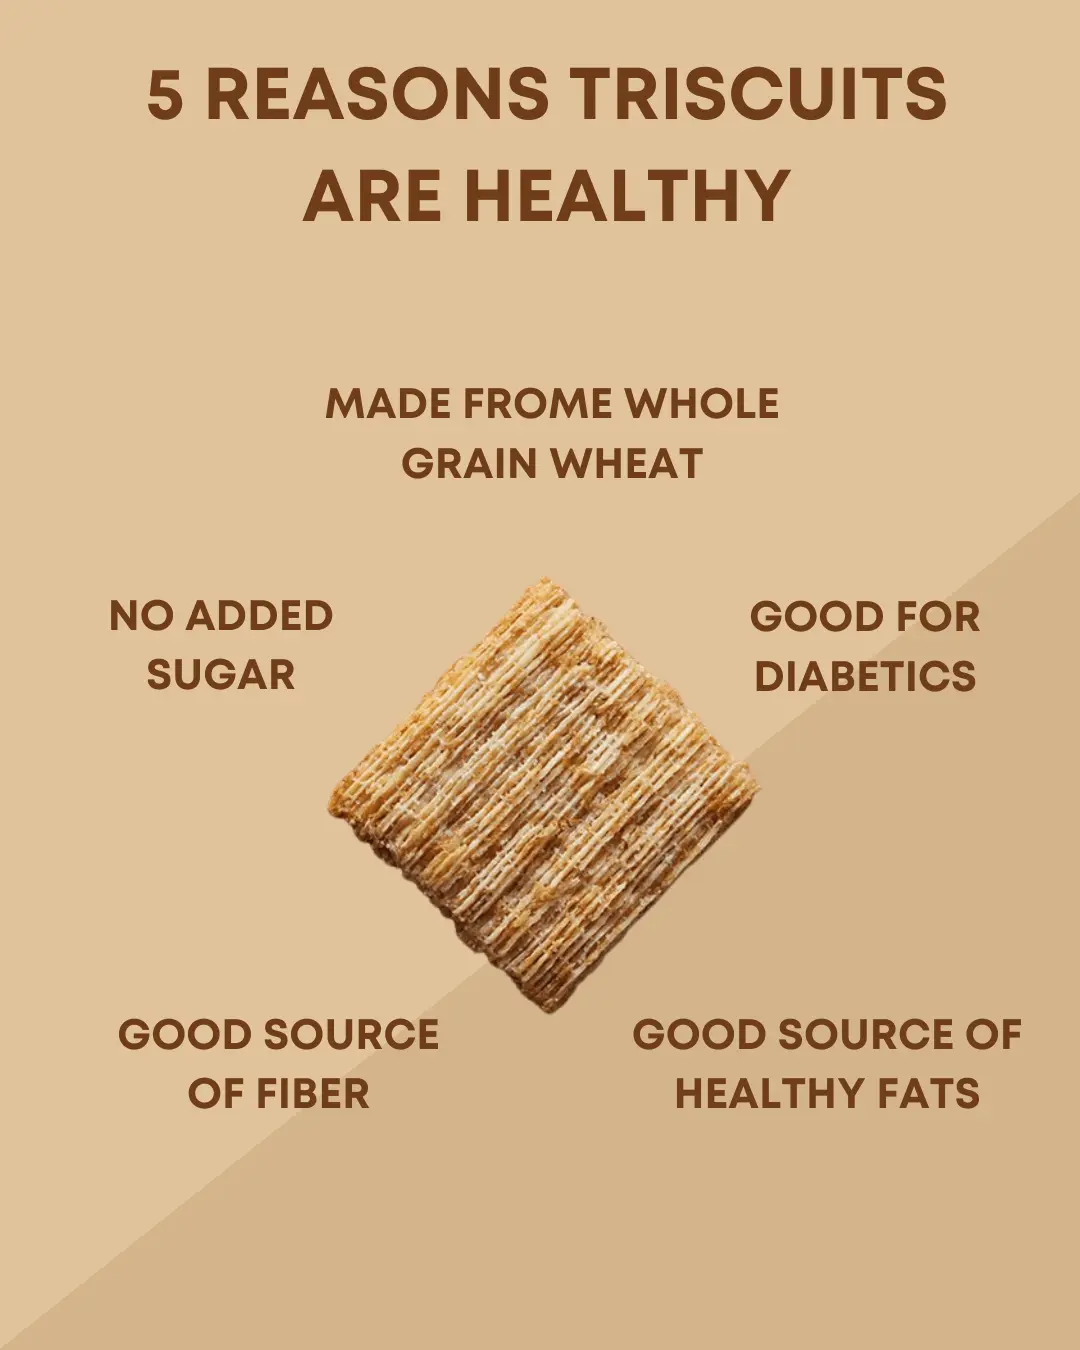 Reasons Triscuits are healthy